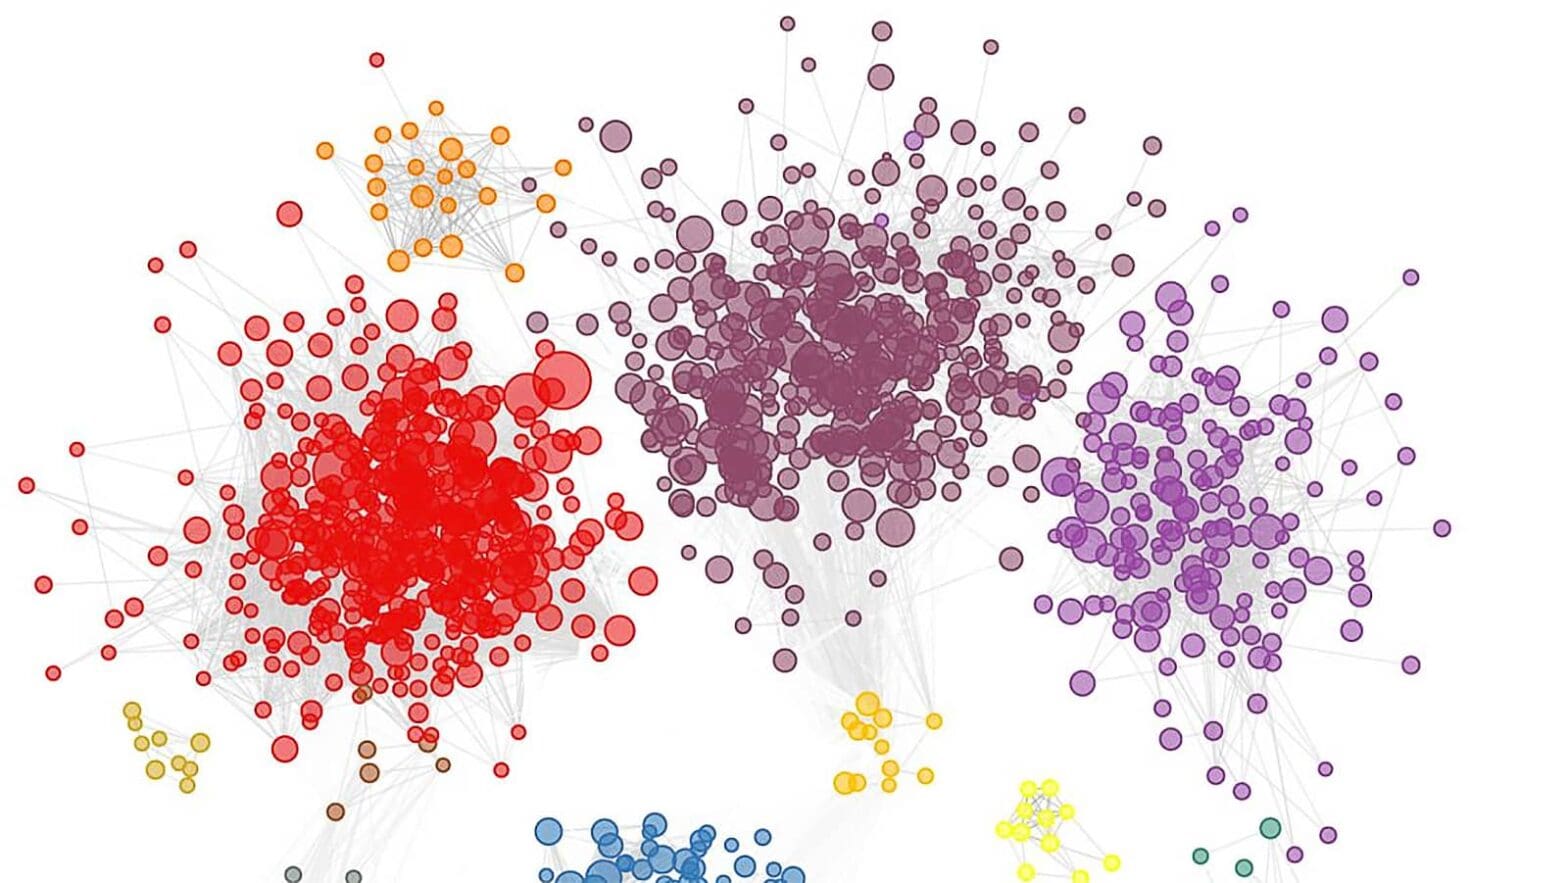 In this illustration, genes possibly associated with autism are clustered into colored groups based on how they function and relate to each other in the brain. The size of an individual circle indicates how highly the gene was ranked by the machine-learning program.